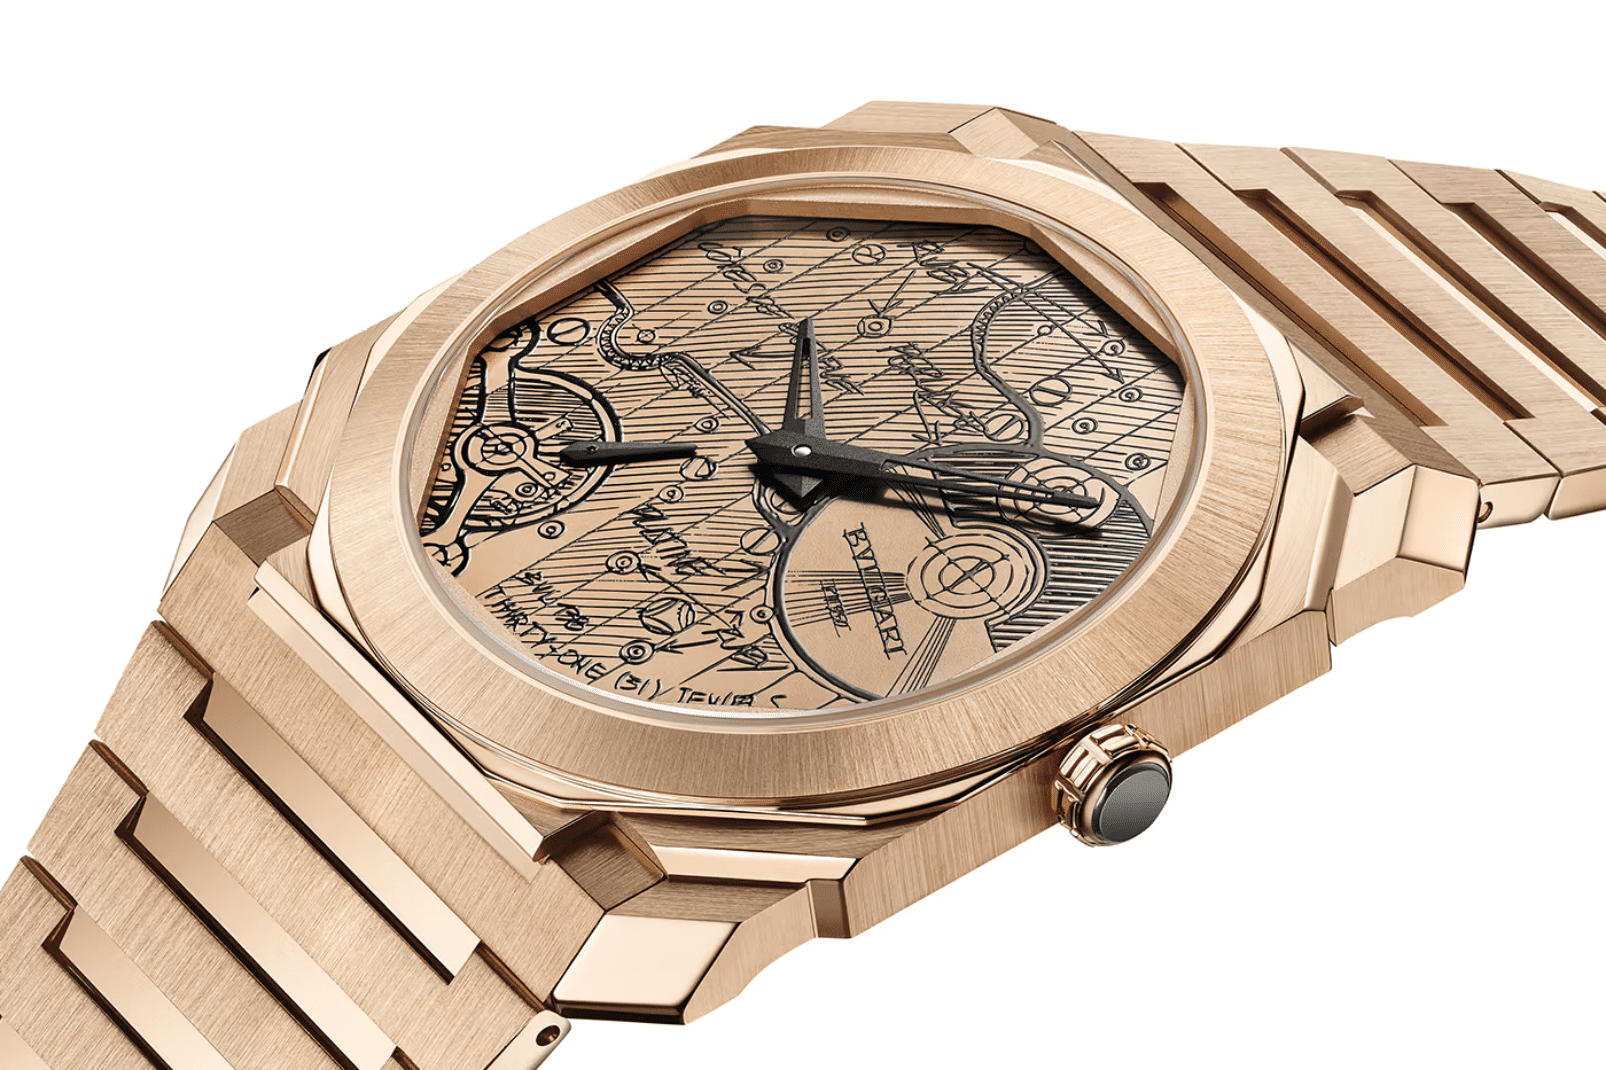 Bulgari Octo Finissimo Sketch Limited Editions